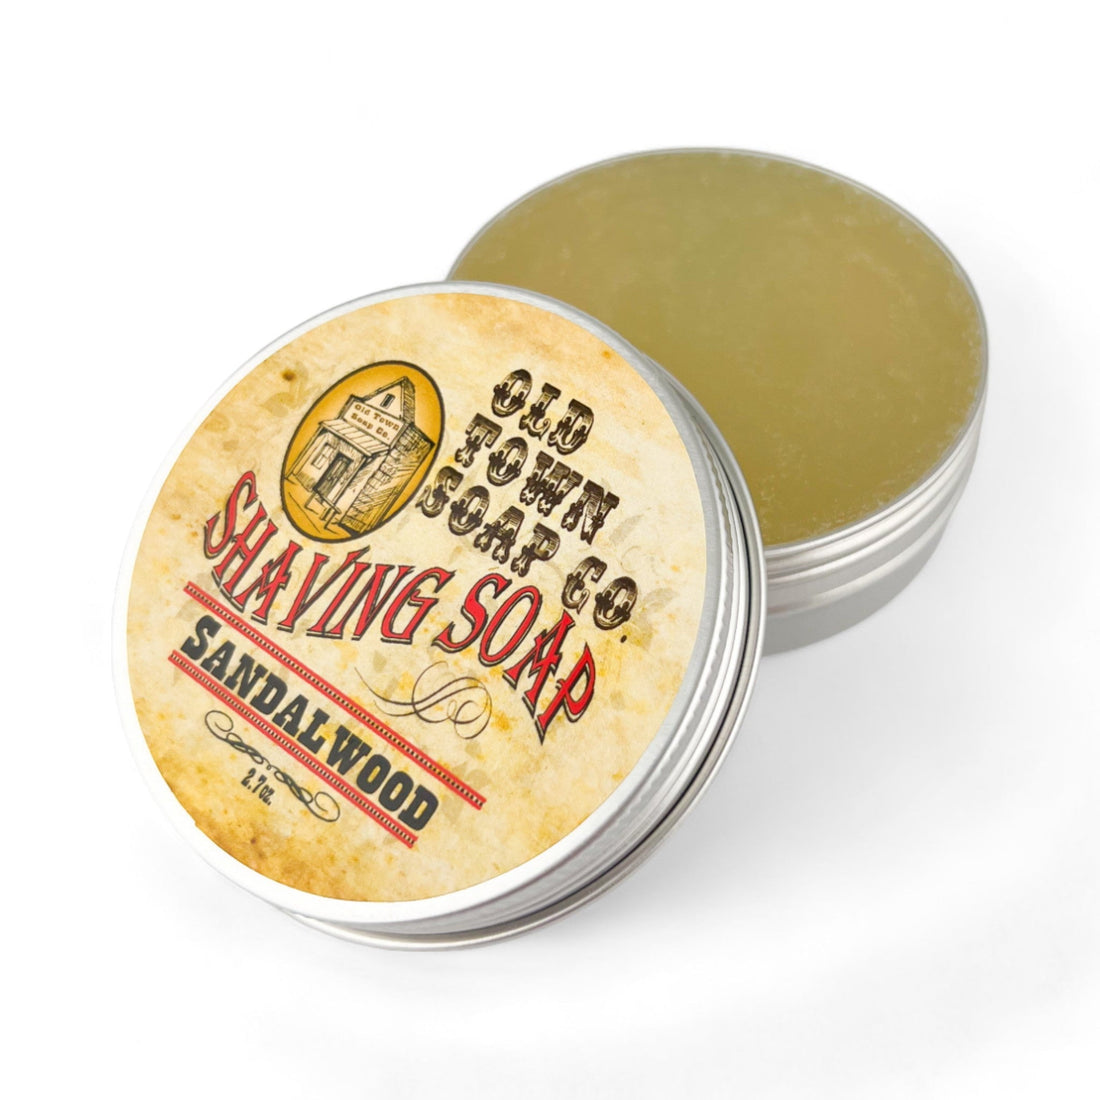 Sandalwood -Shave Soap Tin - Old Town Soap Co.